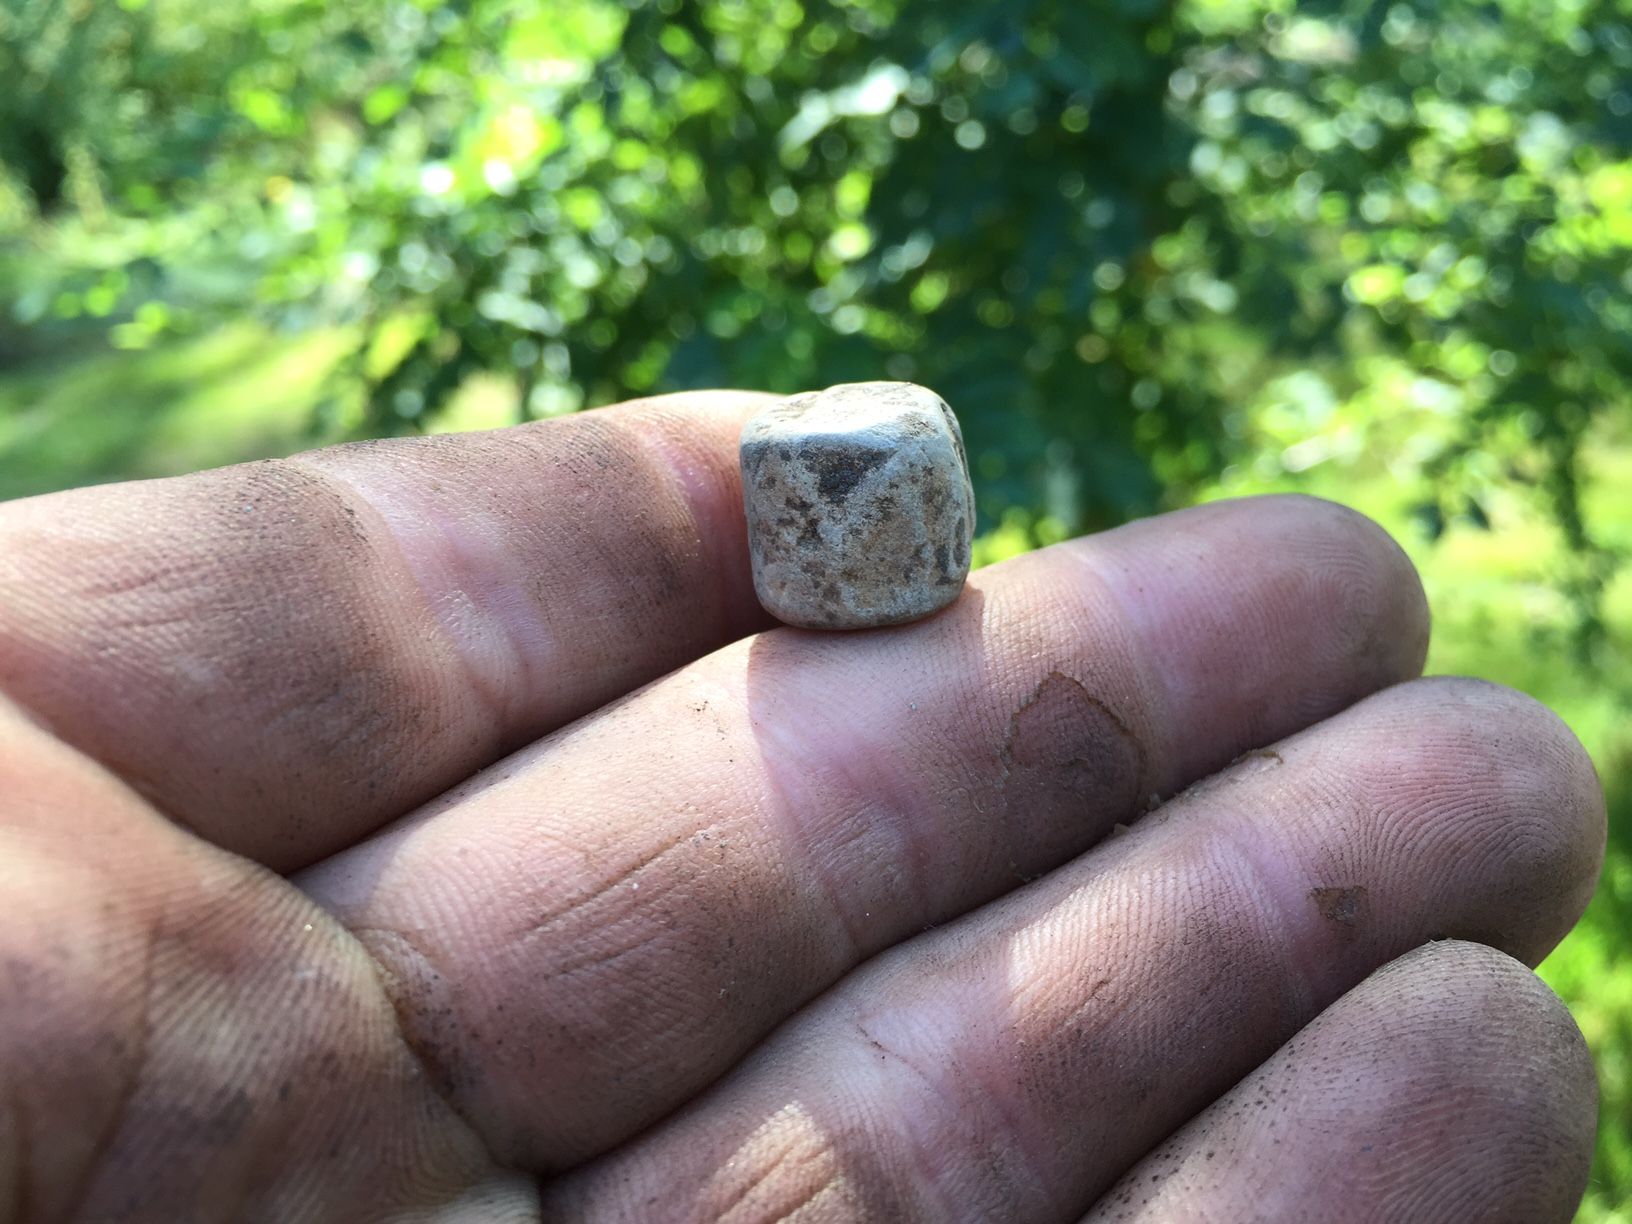 Musket Ball Carved Into Die--likely Revolutionary War era? Found in same area as #5 Button